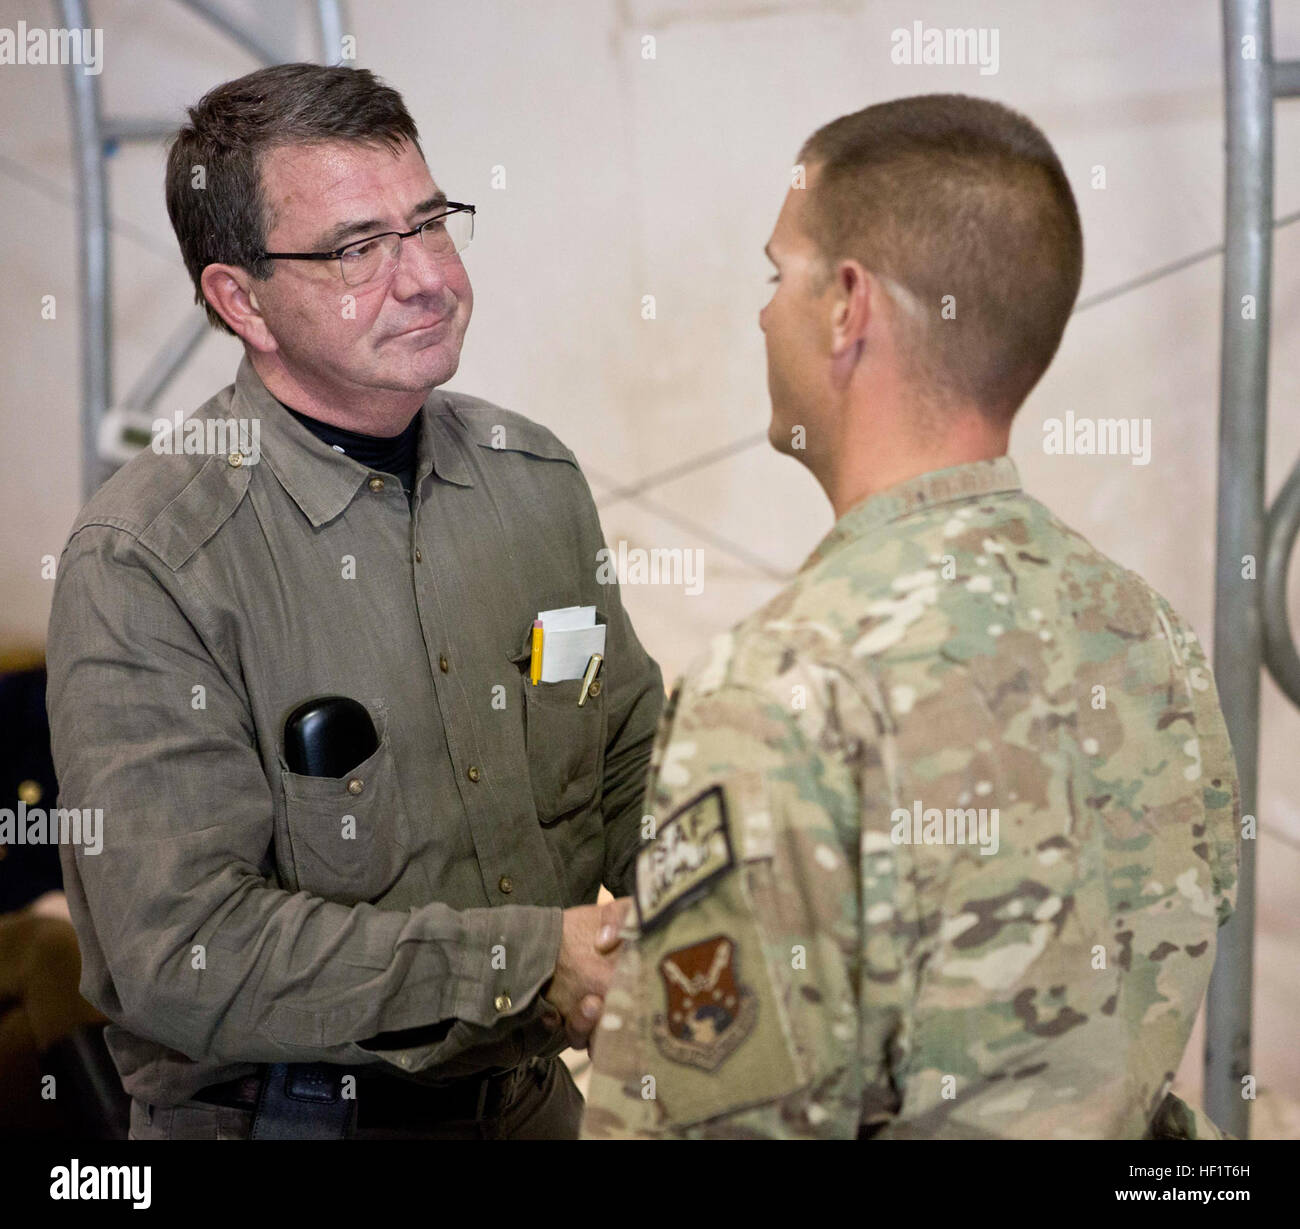 U.S. Deputy Secretary of Defense Ashton Carter, shakes the hands of service members with Regional Command (Southwest) at Camp Leatherneck, Helmand province, Afghanistan, Nov. 29, 2013. Carter came to speak to military leaders and coaltion forces with RC(SW). (Official Marine Corps Photo by Cpl. Nicholas T. Nohalty/Released) U.S. Deputy Secretary of Defense Ash Carter, left, greets a Service member with Regional Command (Southwest) at Camp Leatherneck, Helmand province, Afghanistan, Nov. 29, 2013 131129-M-FN127-018 Stock Photo